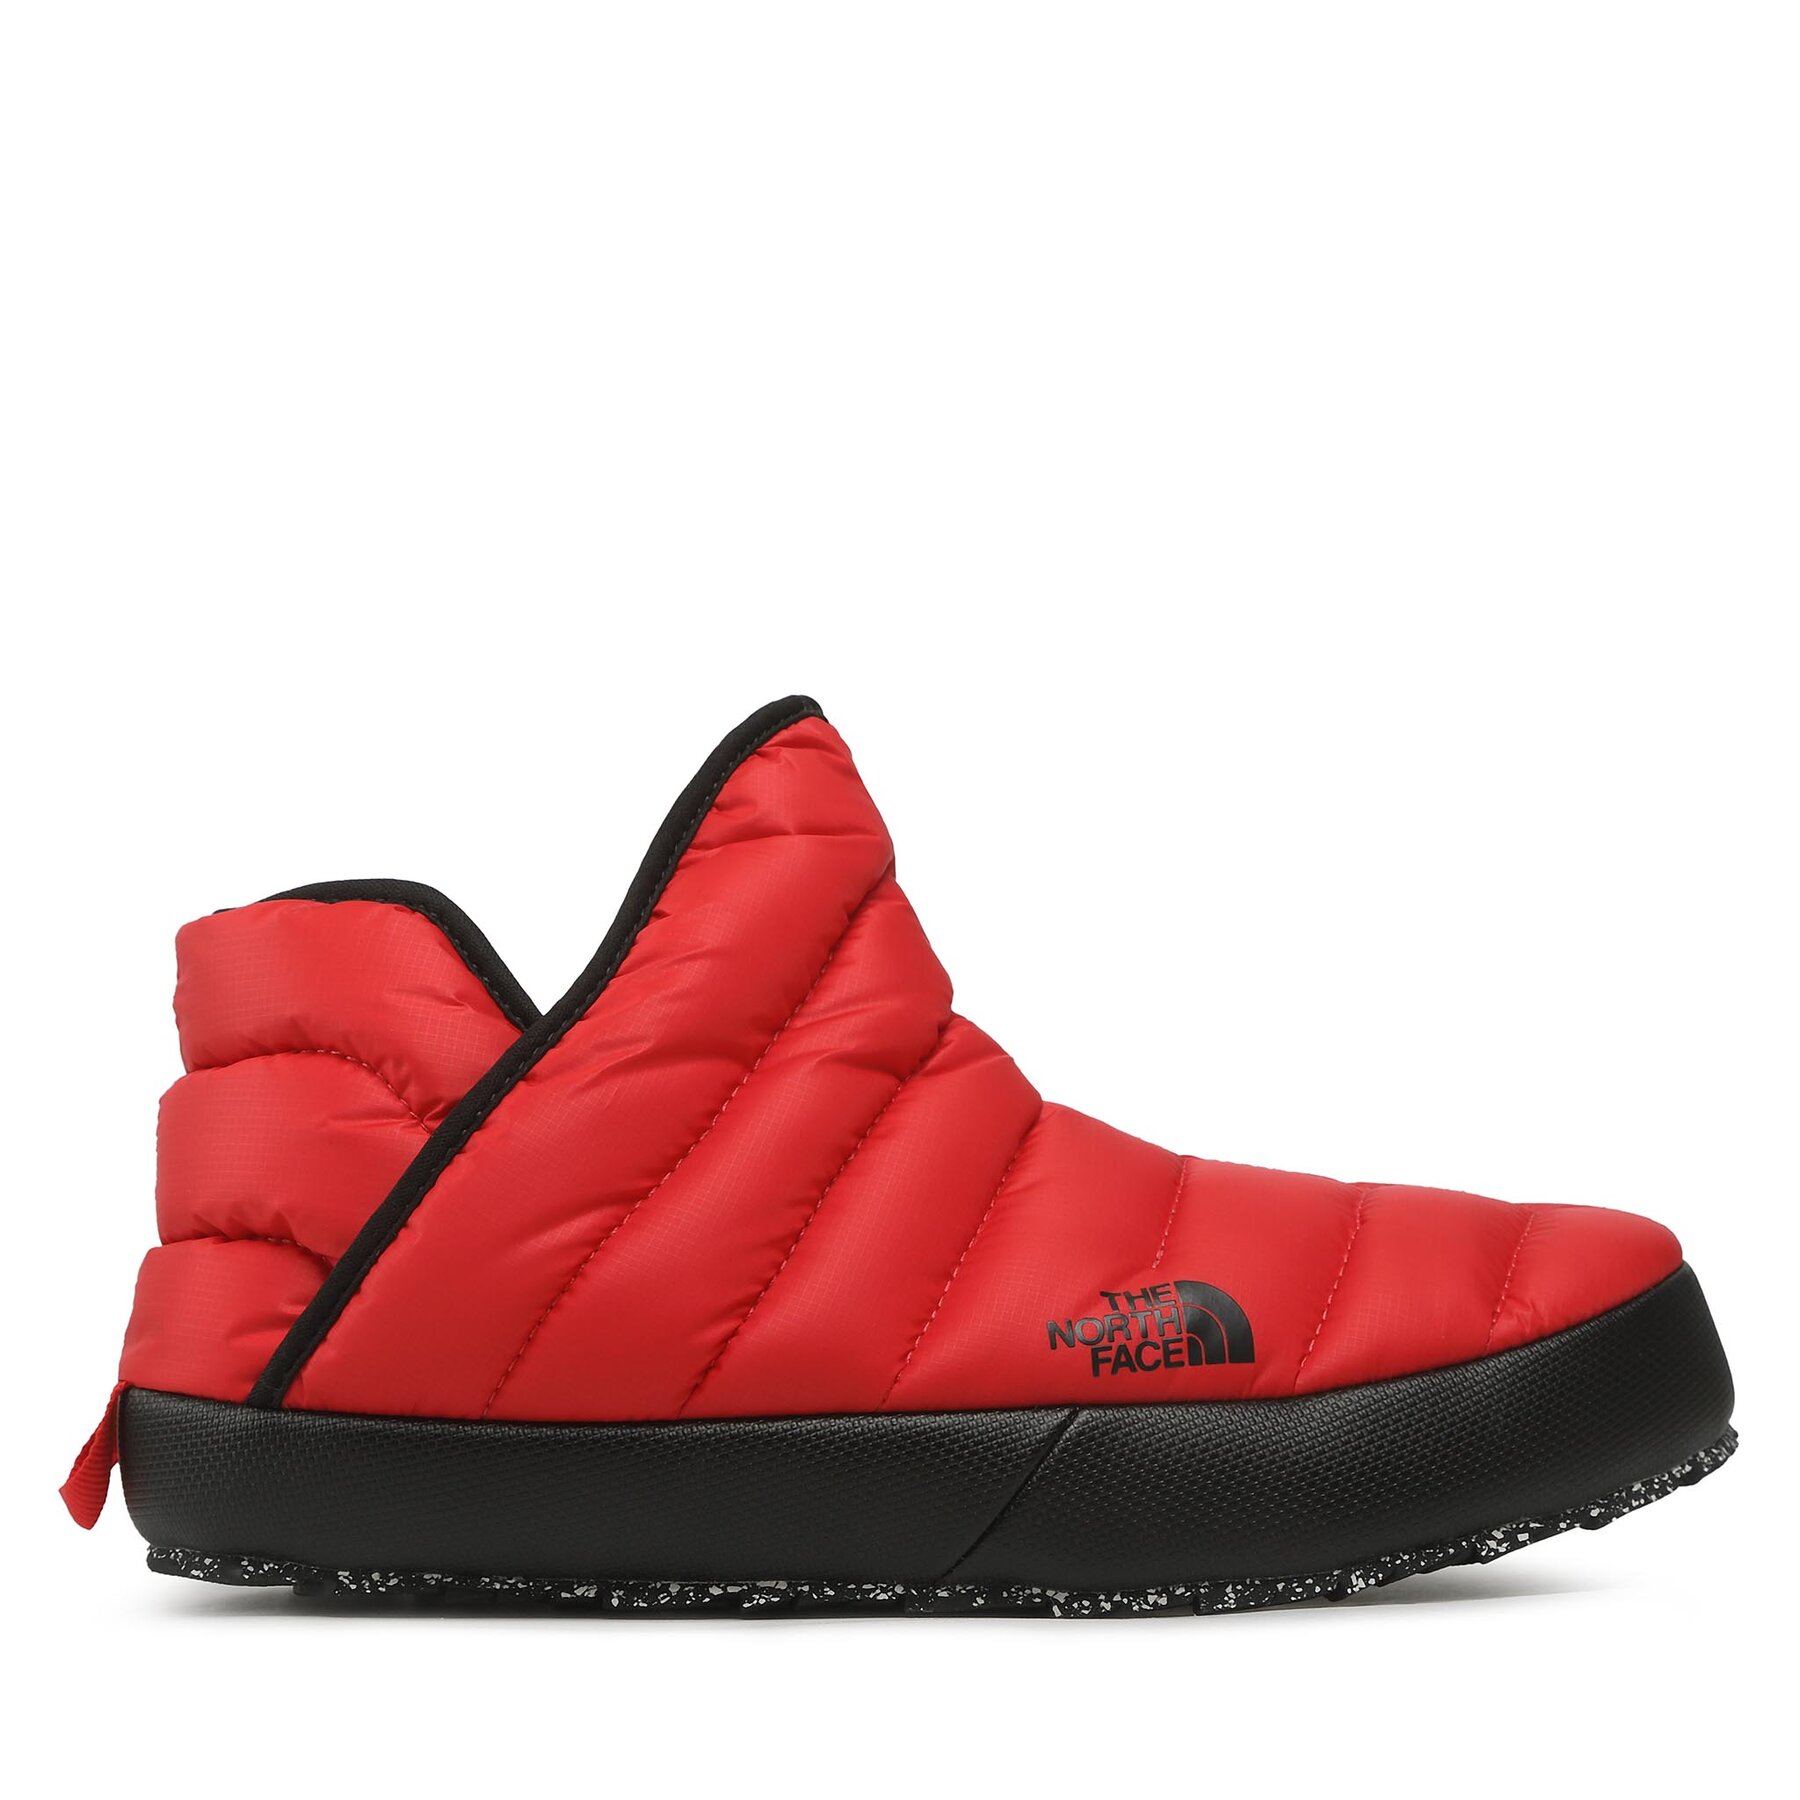 Hausschuhe The North Face Thermoball Traction Bootie NF0A3MKHKZ31 Tnf Red/Tnf Black von The North Face